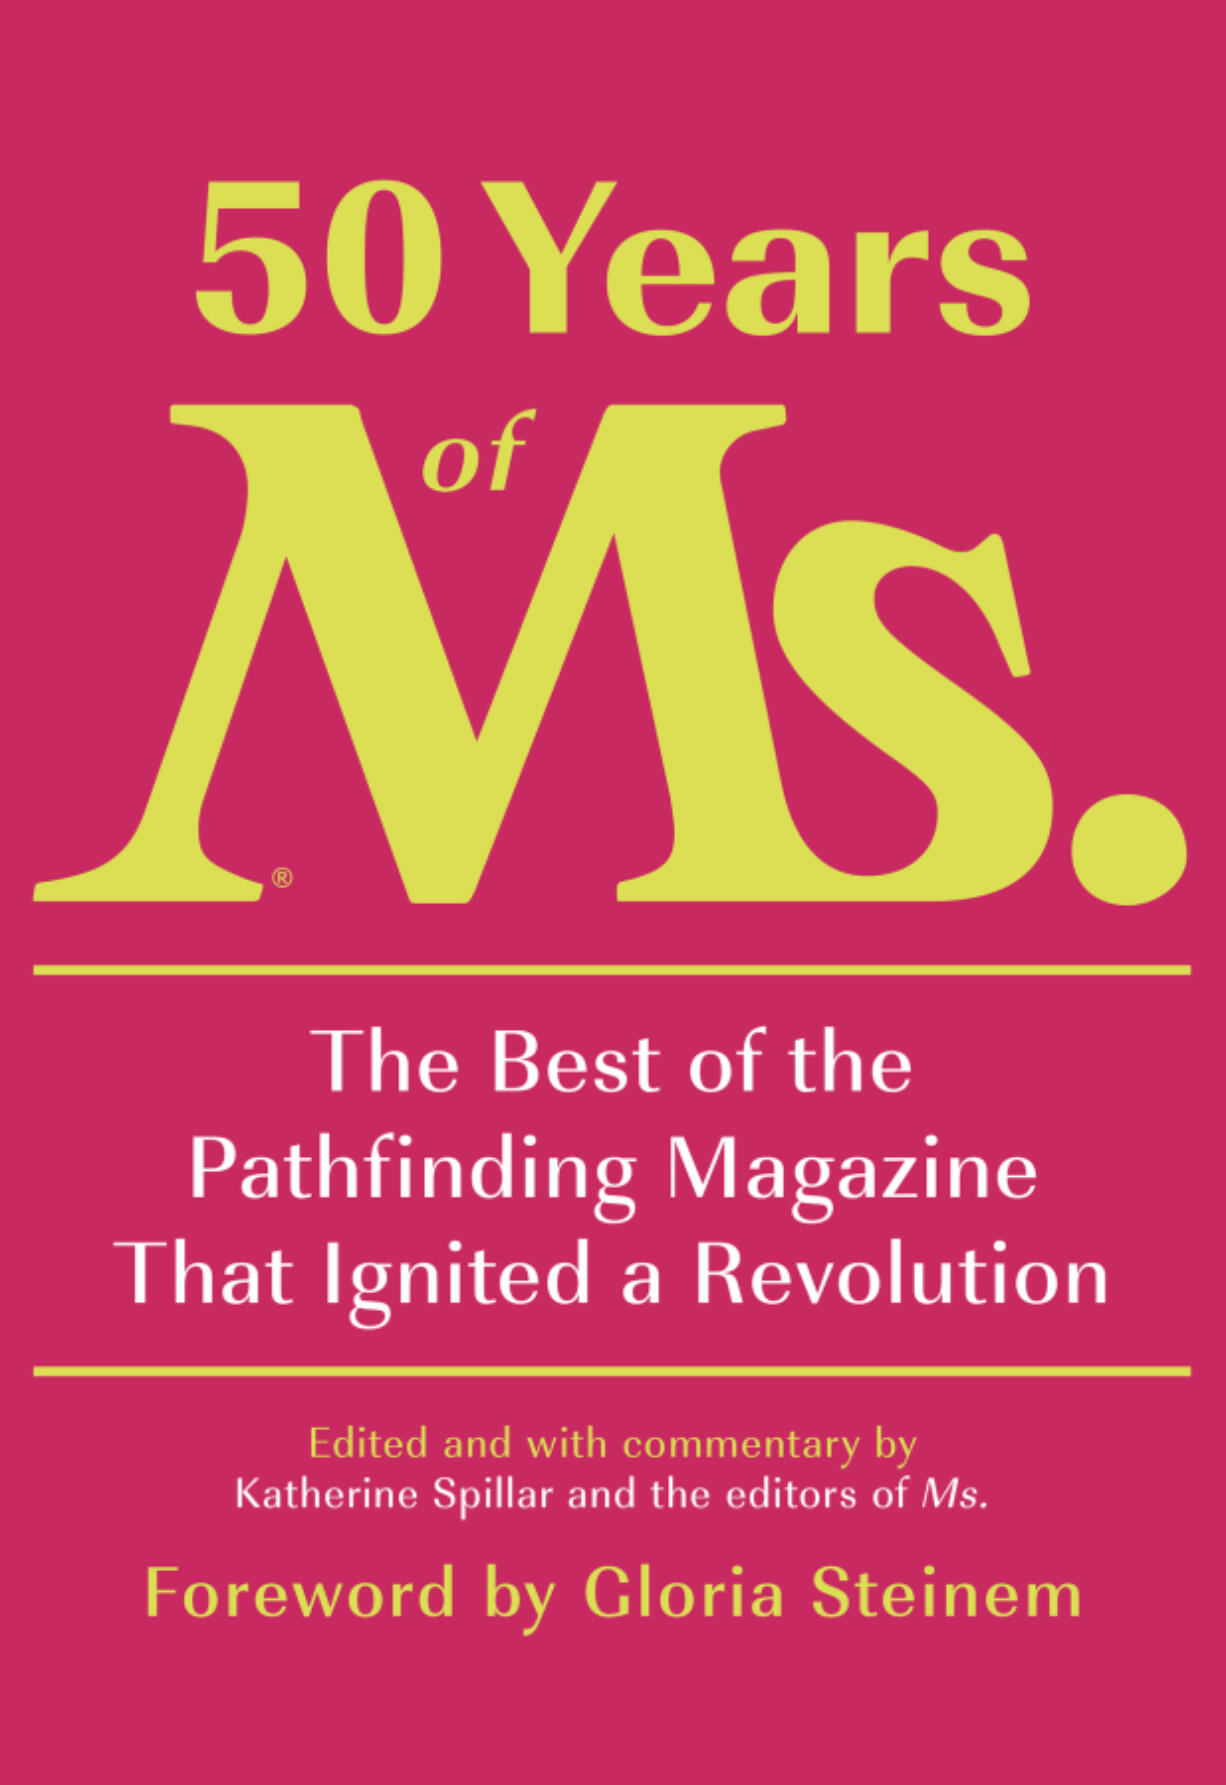 "50 Years of Ms. The Best of the Pathfinding Magazine That Ignited a Revolution." (Ms.